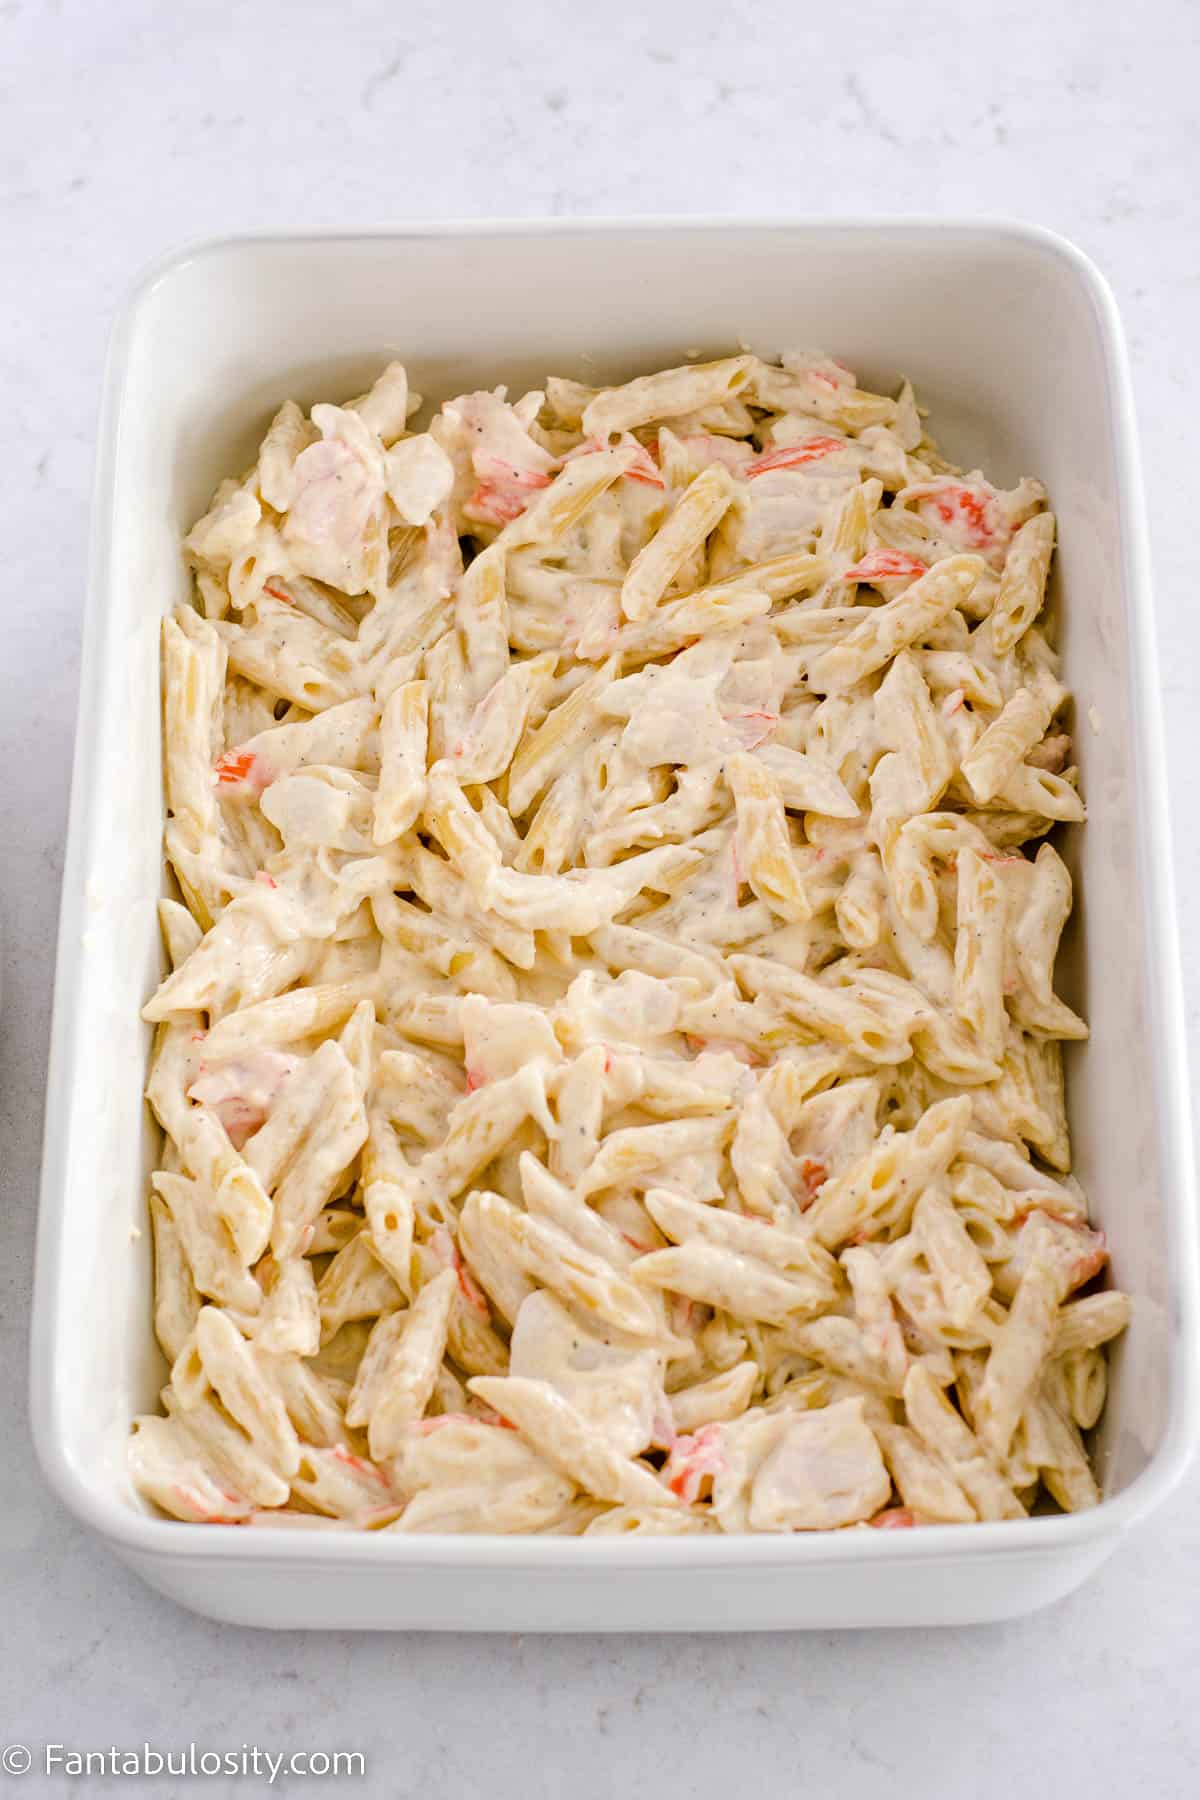 Half of the pasta and crab mixture poured in to baking dish.